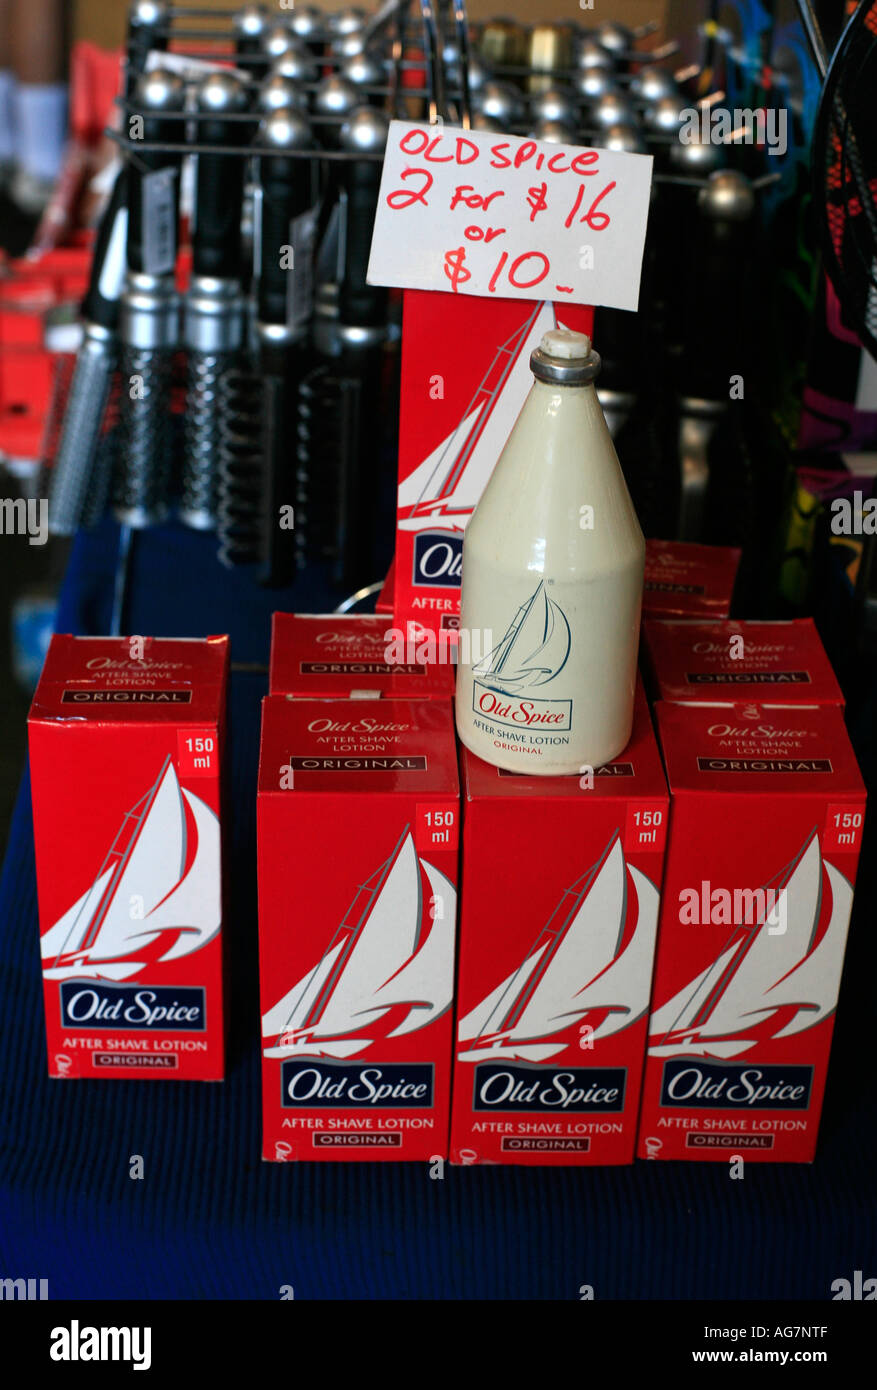 Old Spice mens after shave lotion on sale at Flemington markets in Sydney  Australia Stock Photo - Alamy